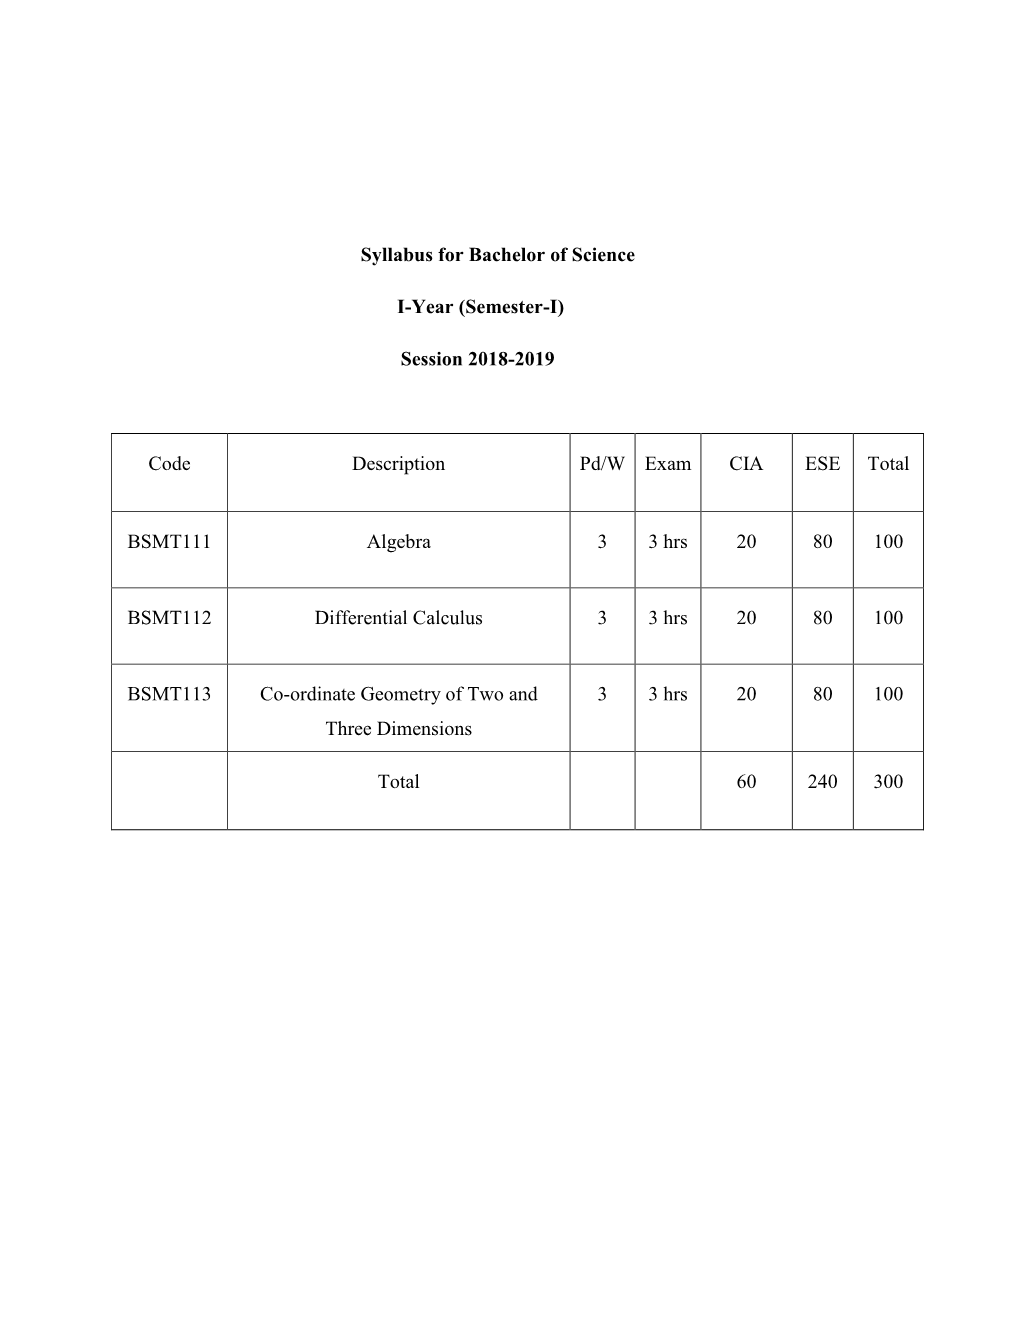 Syllabus for Bachelor of Science I-Year (Semester-I) Session 2018